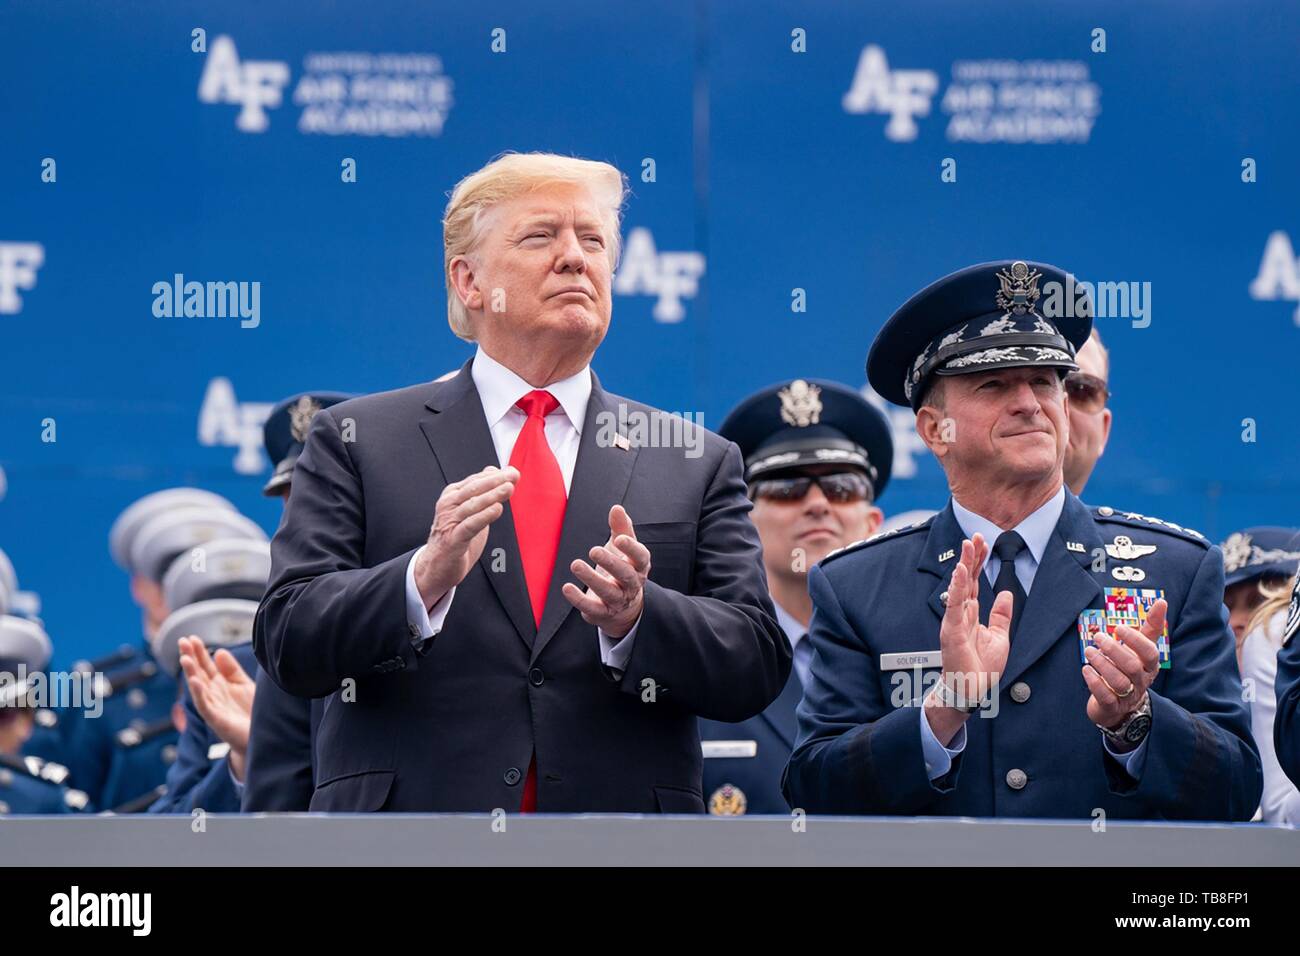 U.S President Donald Trump stands with Air Force Chief of Staff Gen. David Goldfein during the U.S. Air Force Academy Graduation Ceremony at the USAF Academy Falcon Stadium May 30, 2019 in Colorado Springs, Colorado. Credit: Planetpix/Alamy Live News Stock Photo